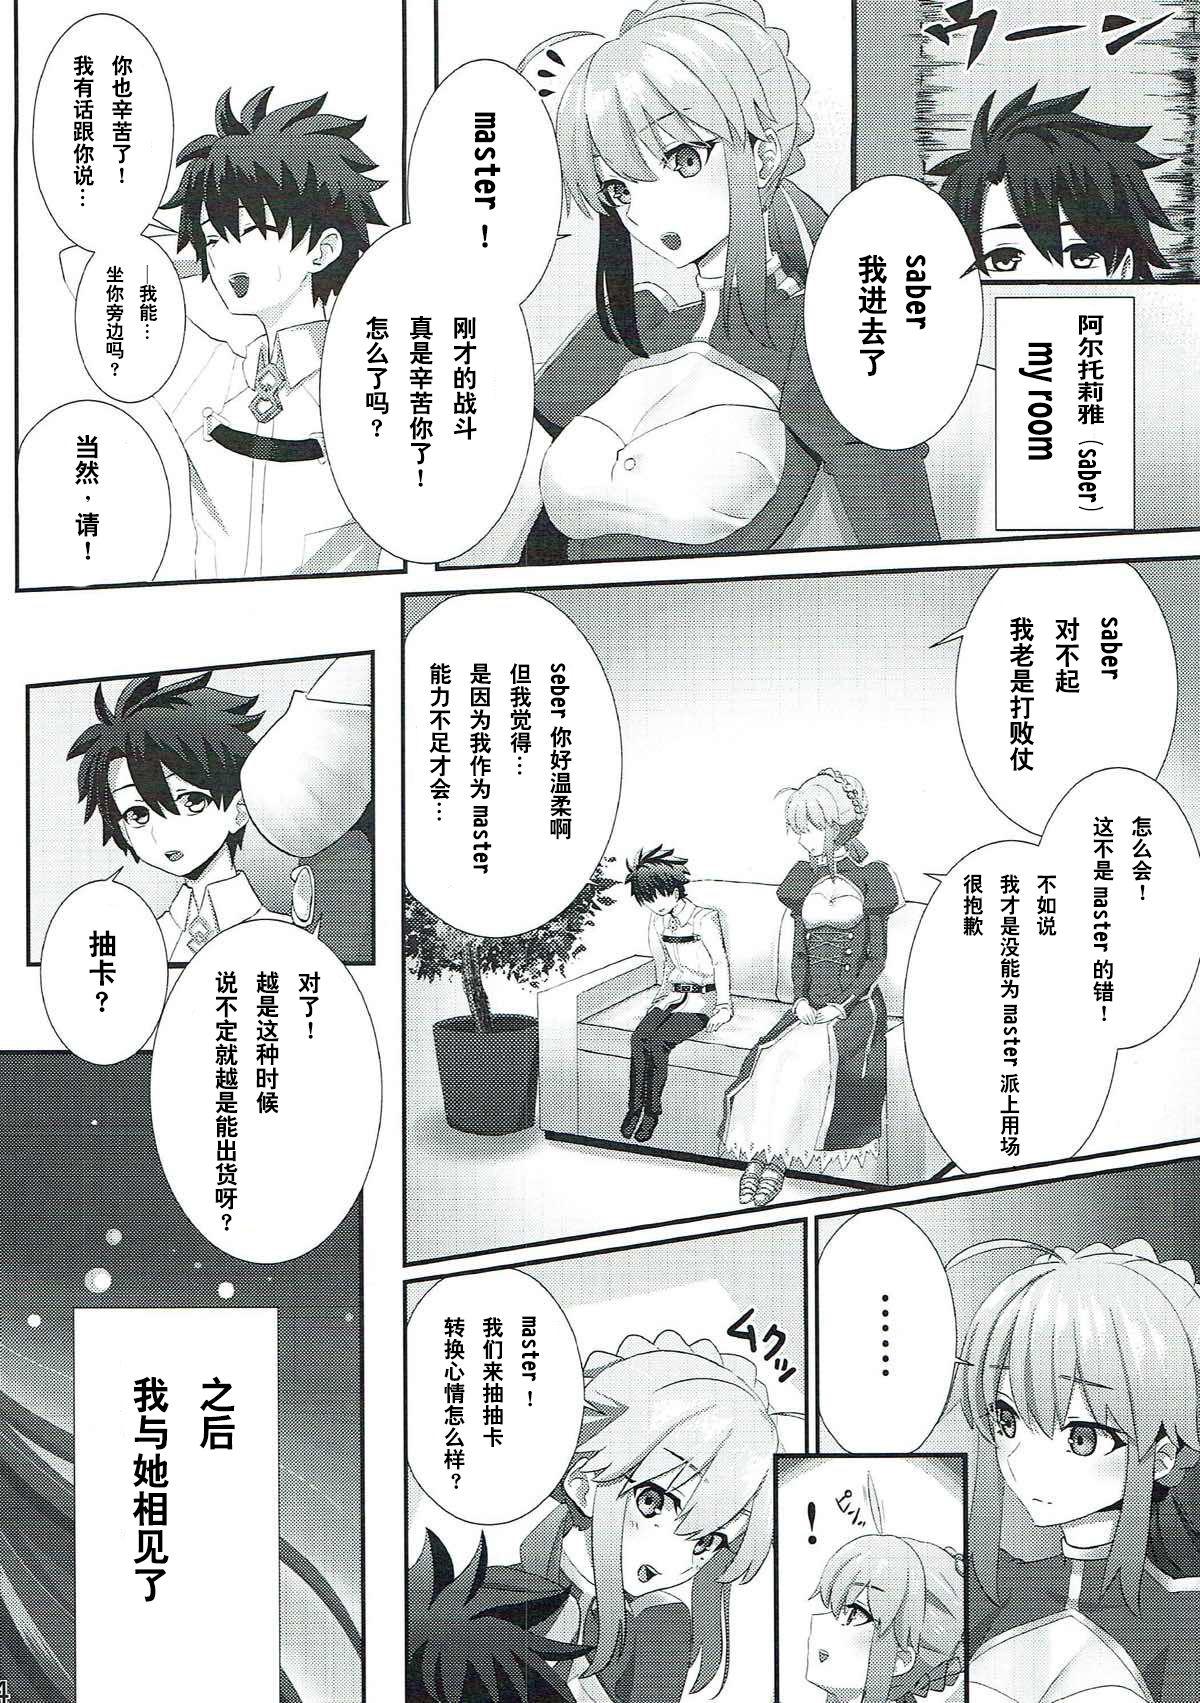 Swing Scathach-san to Issho - Fate grand order Step Fantasy - Page 3